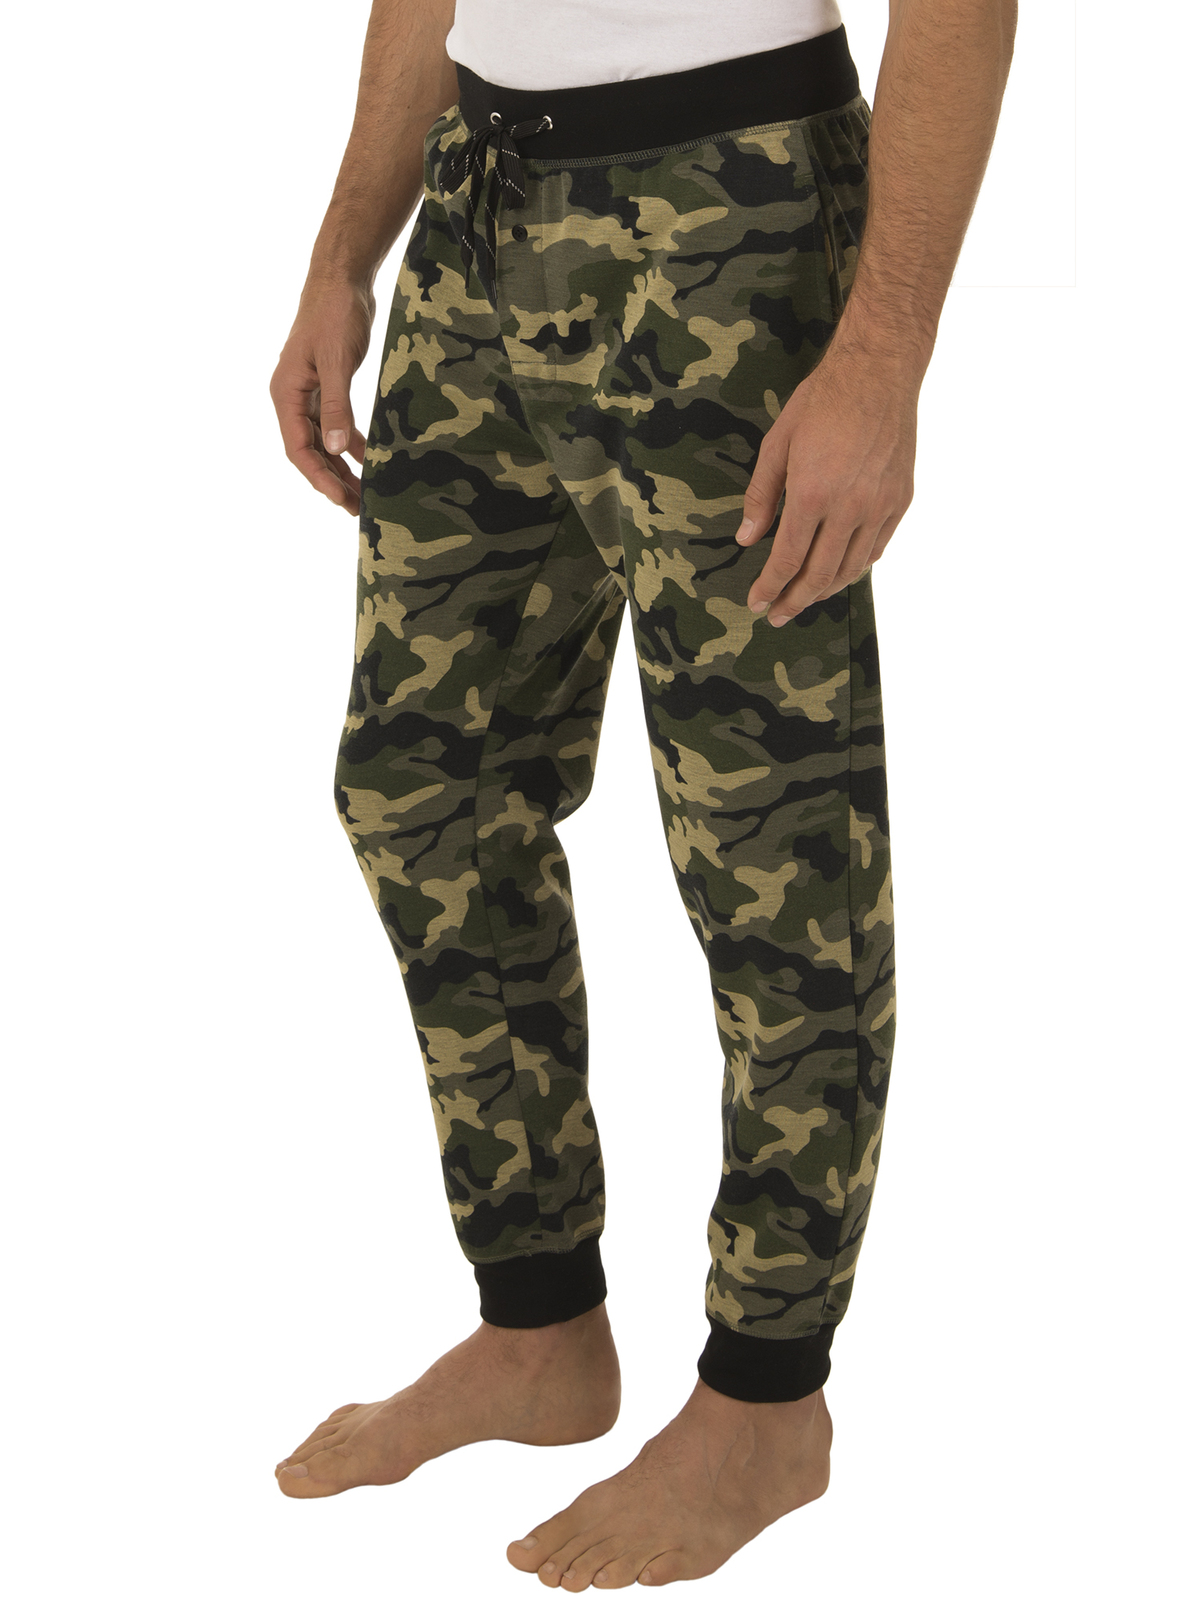 Fruit of the Loom Men's Camo Jogger Sleep Pant Mens Camouflage Lounge ...